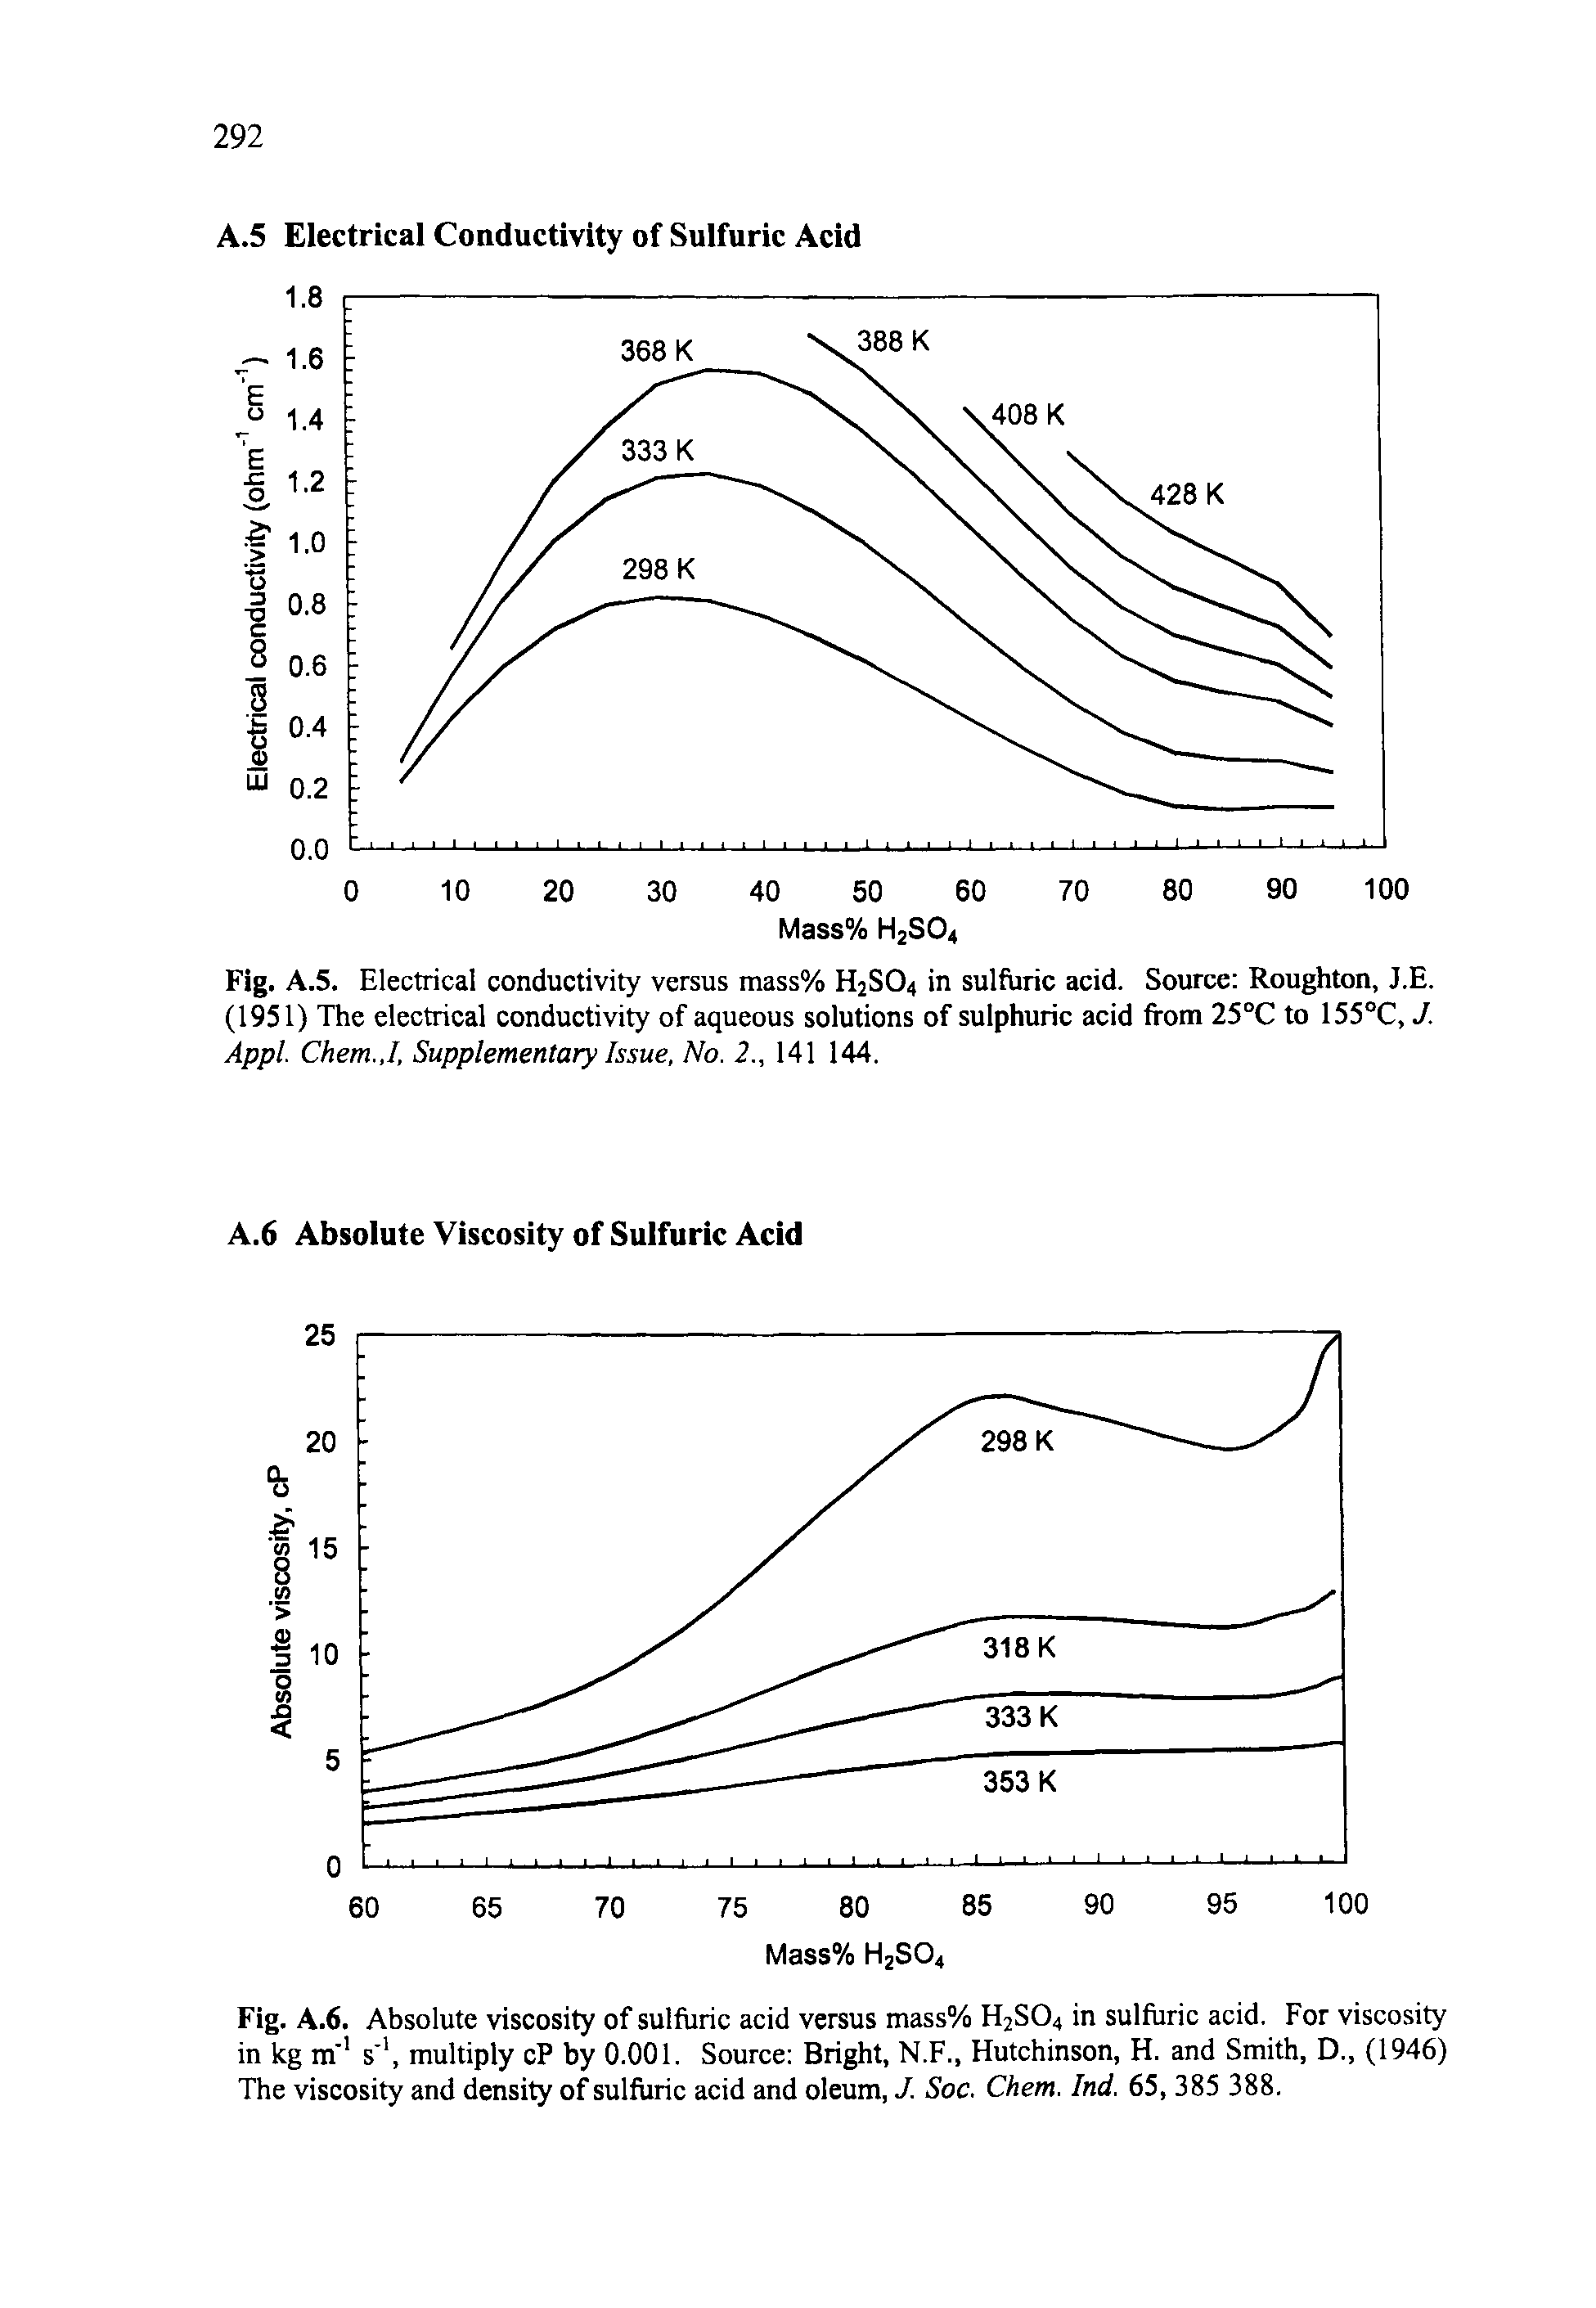 Fig. A.5. Electrical conductivity versus mass% H2SO4 in sulfuric acid. Source Roughton, J.E. (1951) The electrical conductivity of aqueous solutions of sulphuric acid from 25°C to 155°C, J. Appl. Chem.,1, Supplementary Issue, No. 2., 141 144.